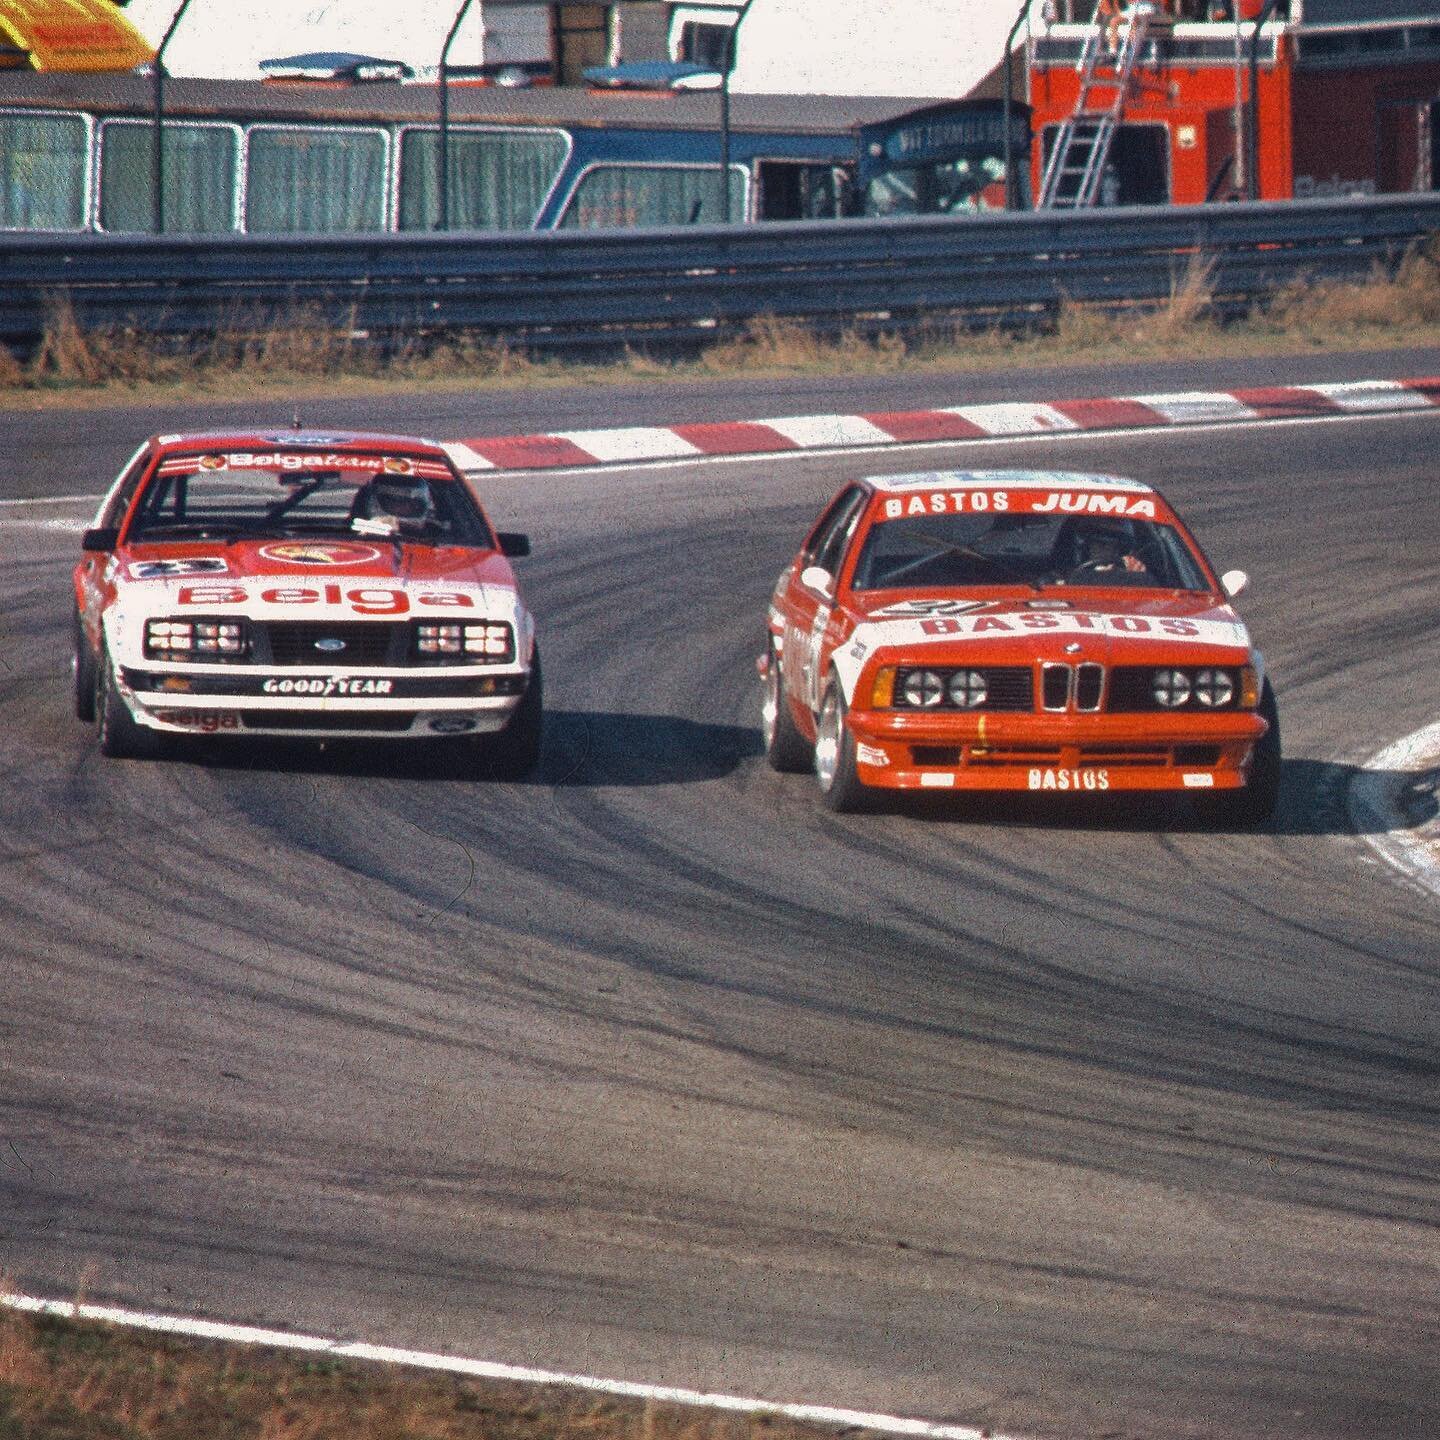 Belgian tobacco brands Belga and Bastos were competing fiercely in the 70/80s on the racing scene. Here is Jean-Michel Martin in the Belga CC Racing Ford Mustang opening the door to Thierry Tassin in the Juma Bastos 635 csi at the EG Trophy in Zolder